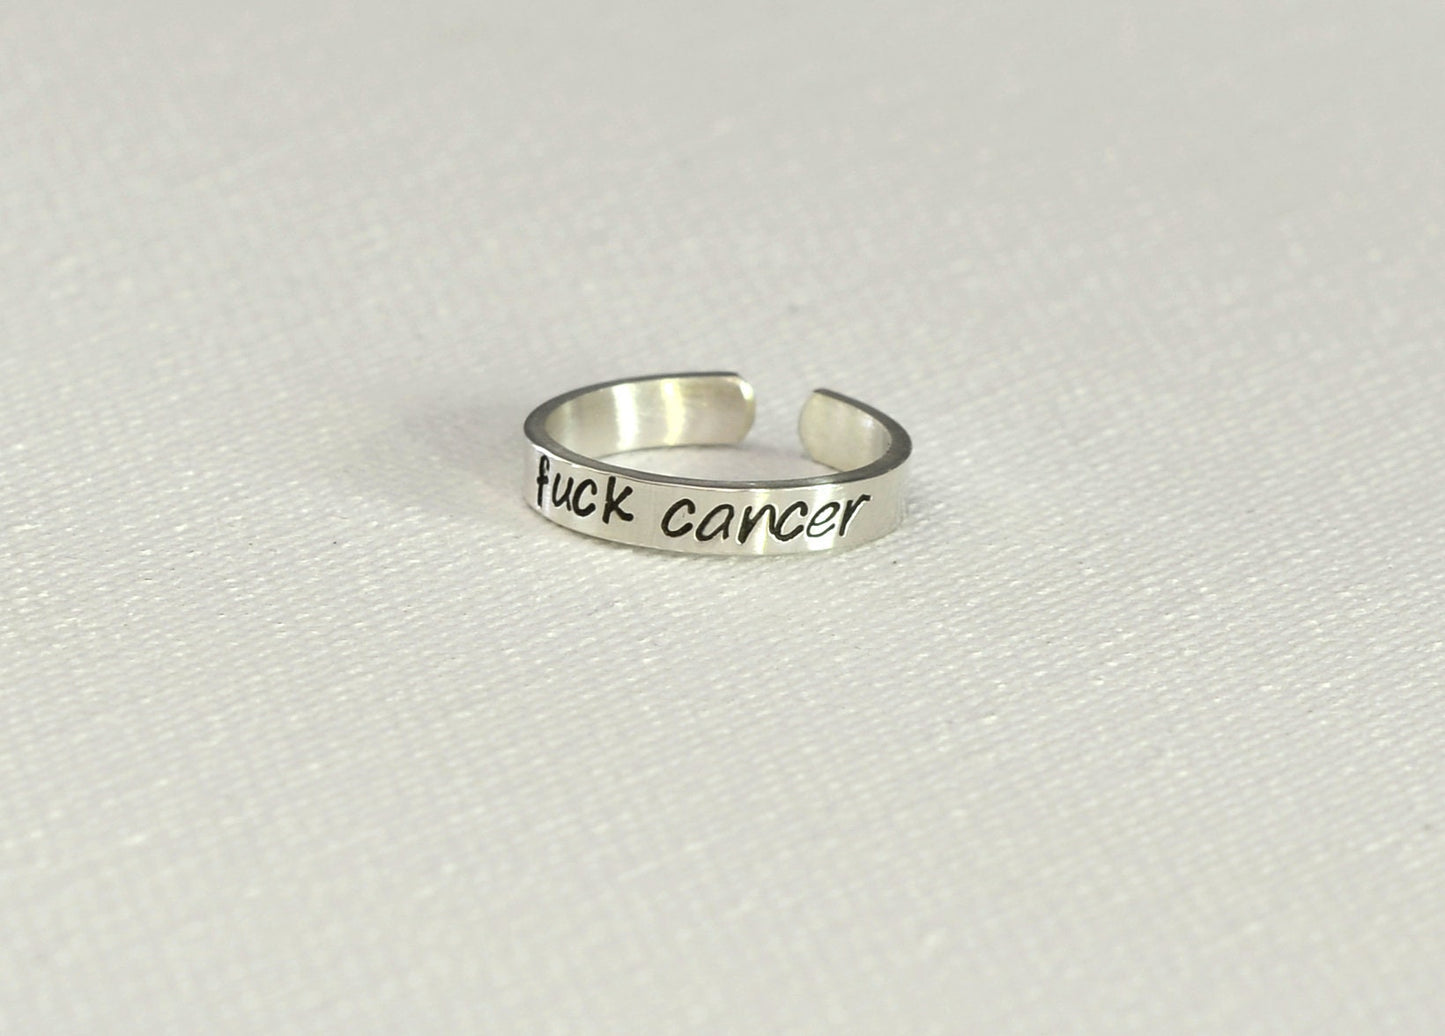 f cancer silver toe ring for cancer awareness